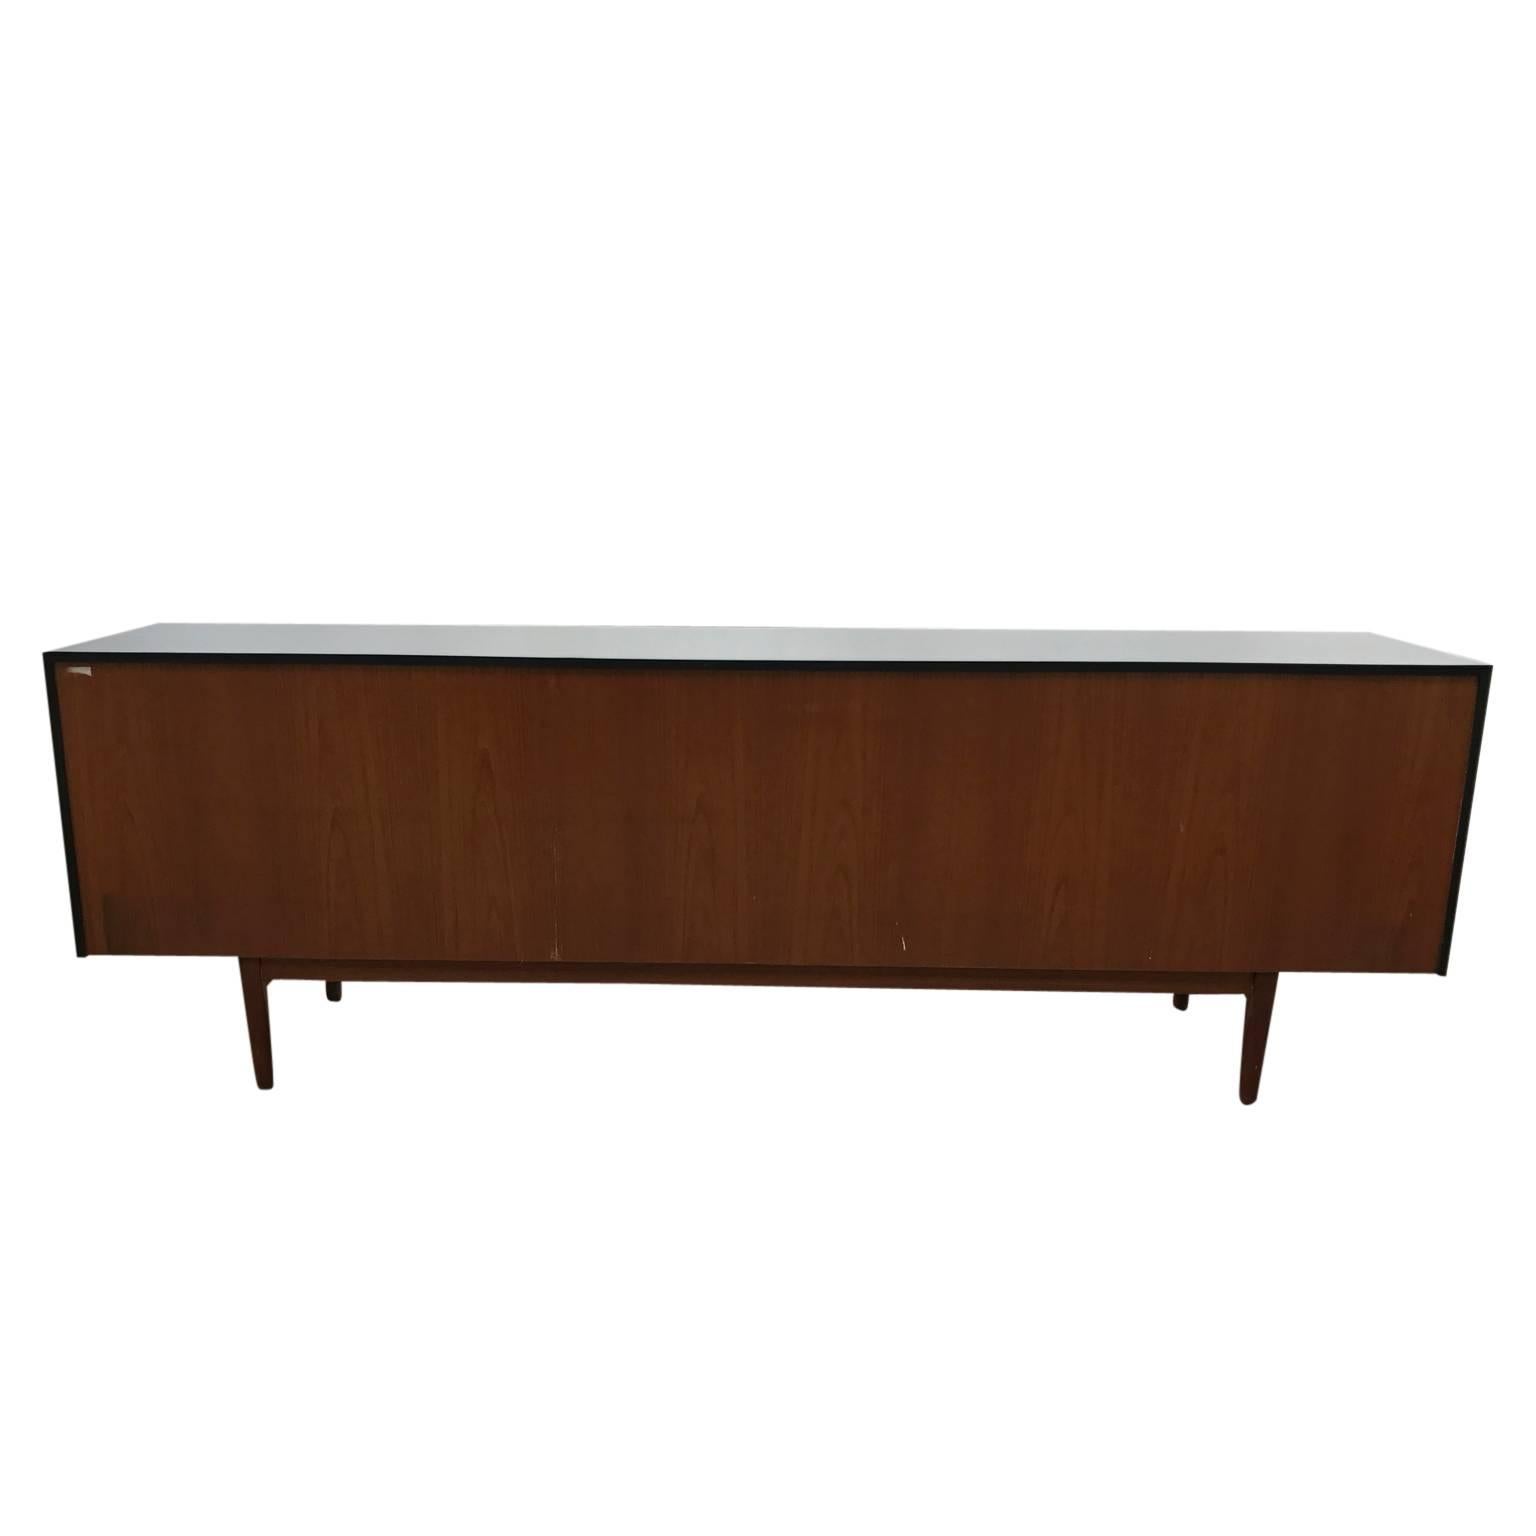 Danish Modern Ib Kofod-Larsen Danish Sideboard / Credenza in Teak and Charcoal. This Stunning sideboard / credenza features a bold two tone finish in deep charcoal and a light colored teak front. The top holds four drawers while the bottom has four